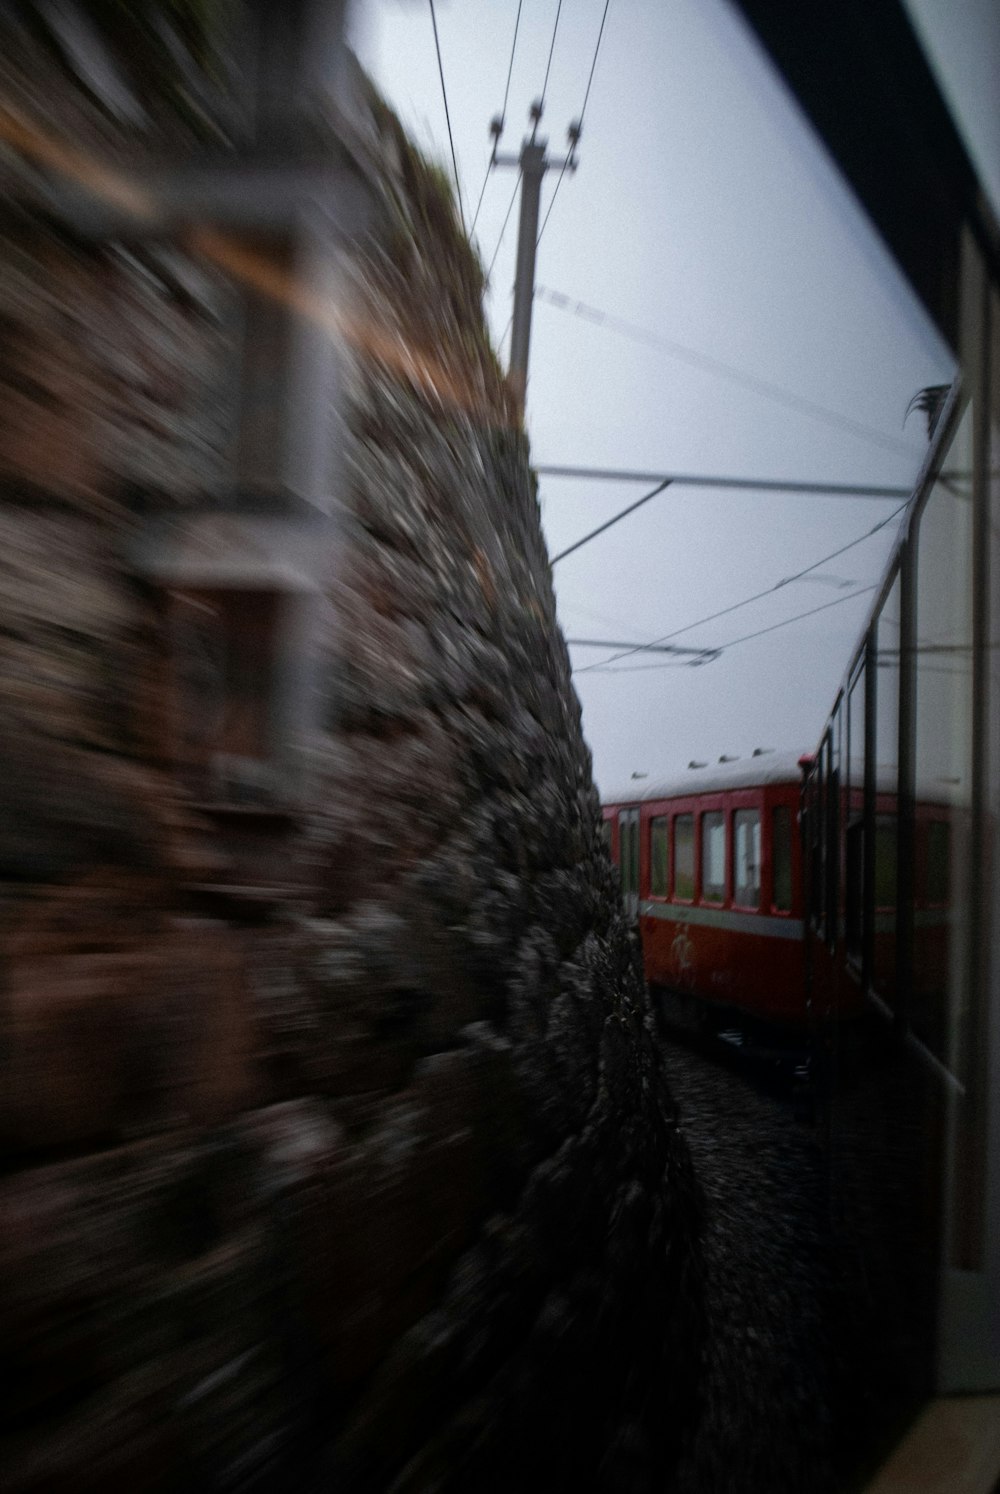 a red train traveling down train tracks next to a stone wall